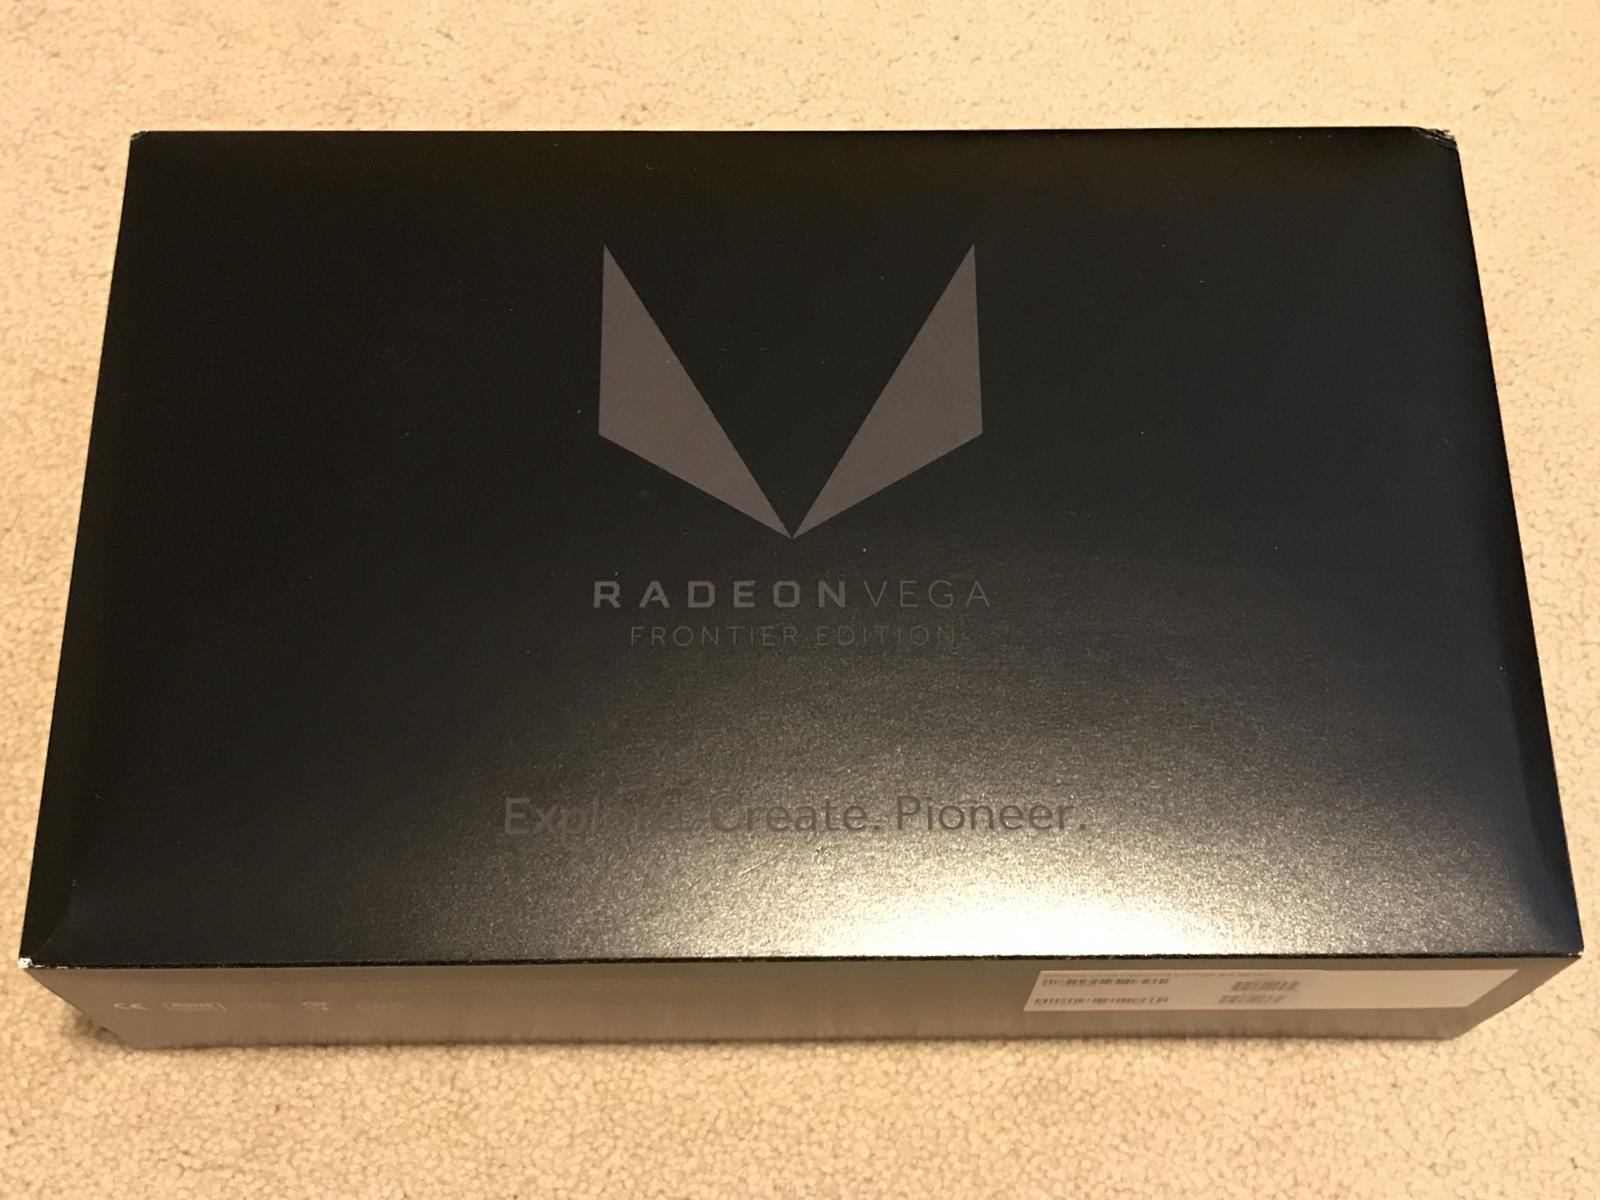 For sale AMD Radeon Vega Frontier Edition 100-506061 16GB Graphics Card - Brand New